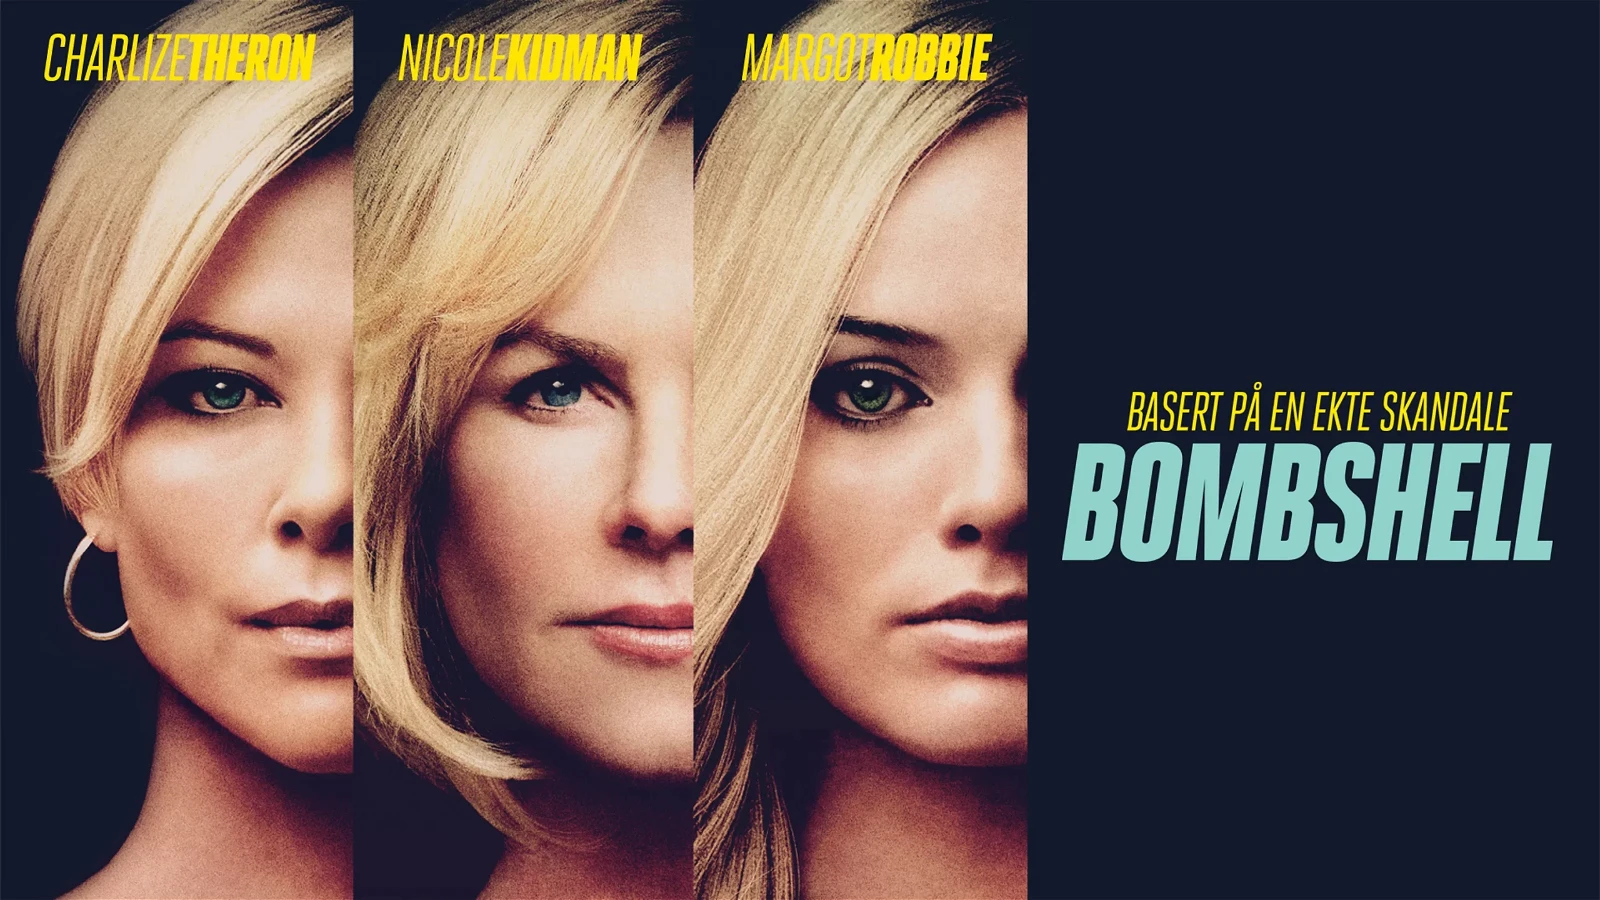 Bombshell was released in 2019